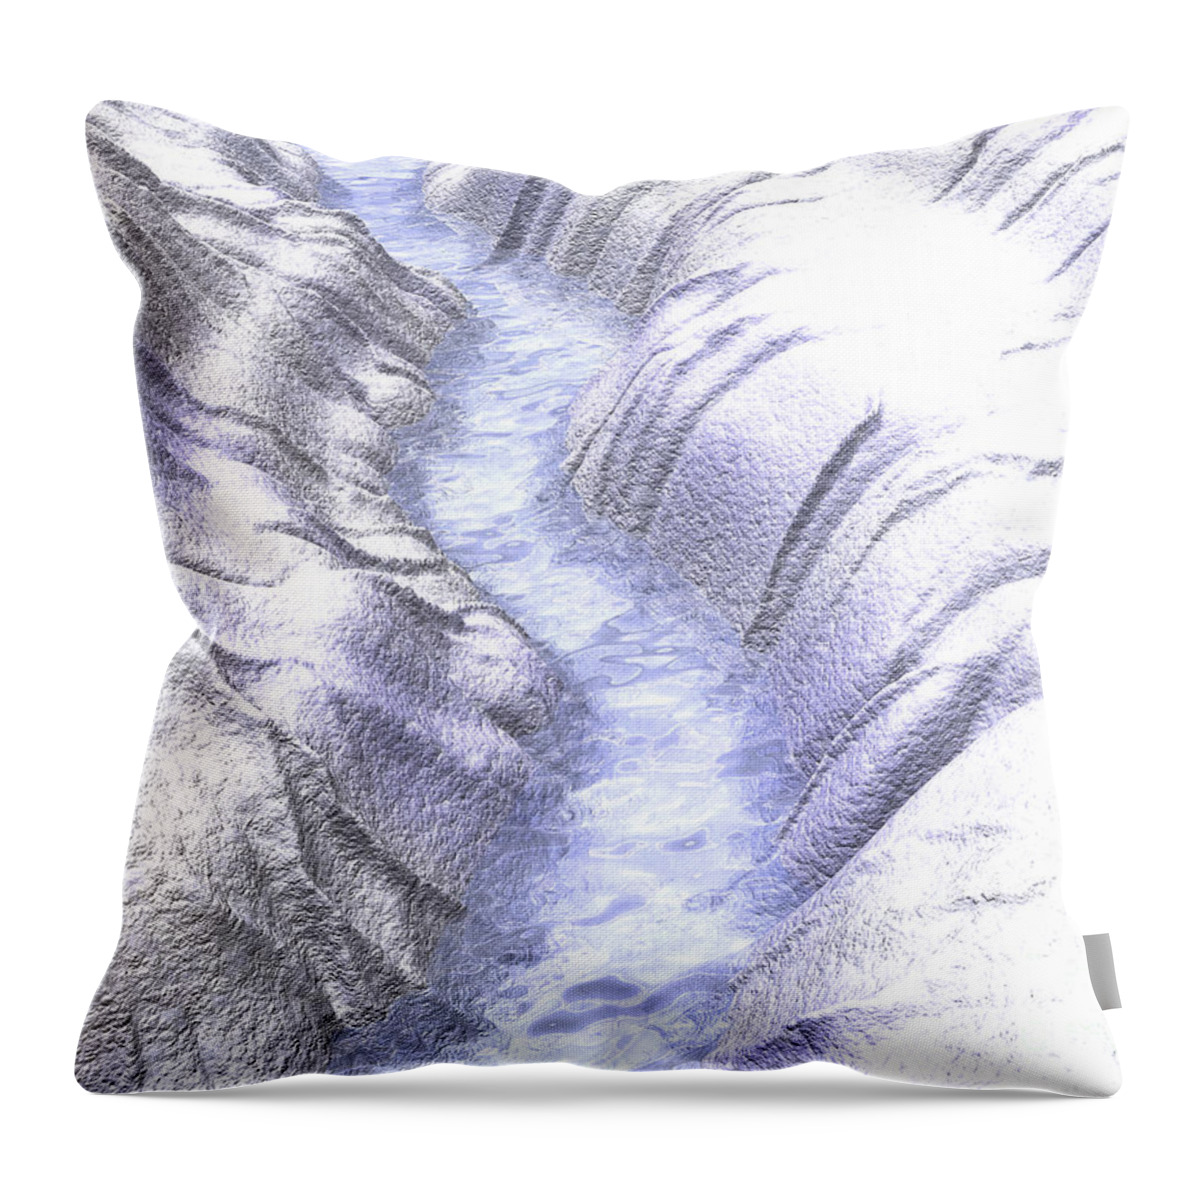 River Throw Pillow featuring the digital art Frozen Ice River by Phil Perkins